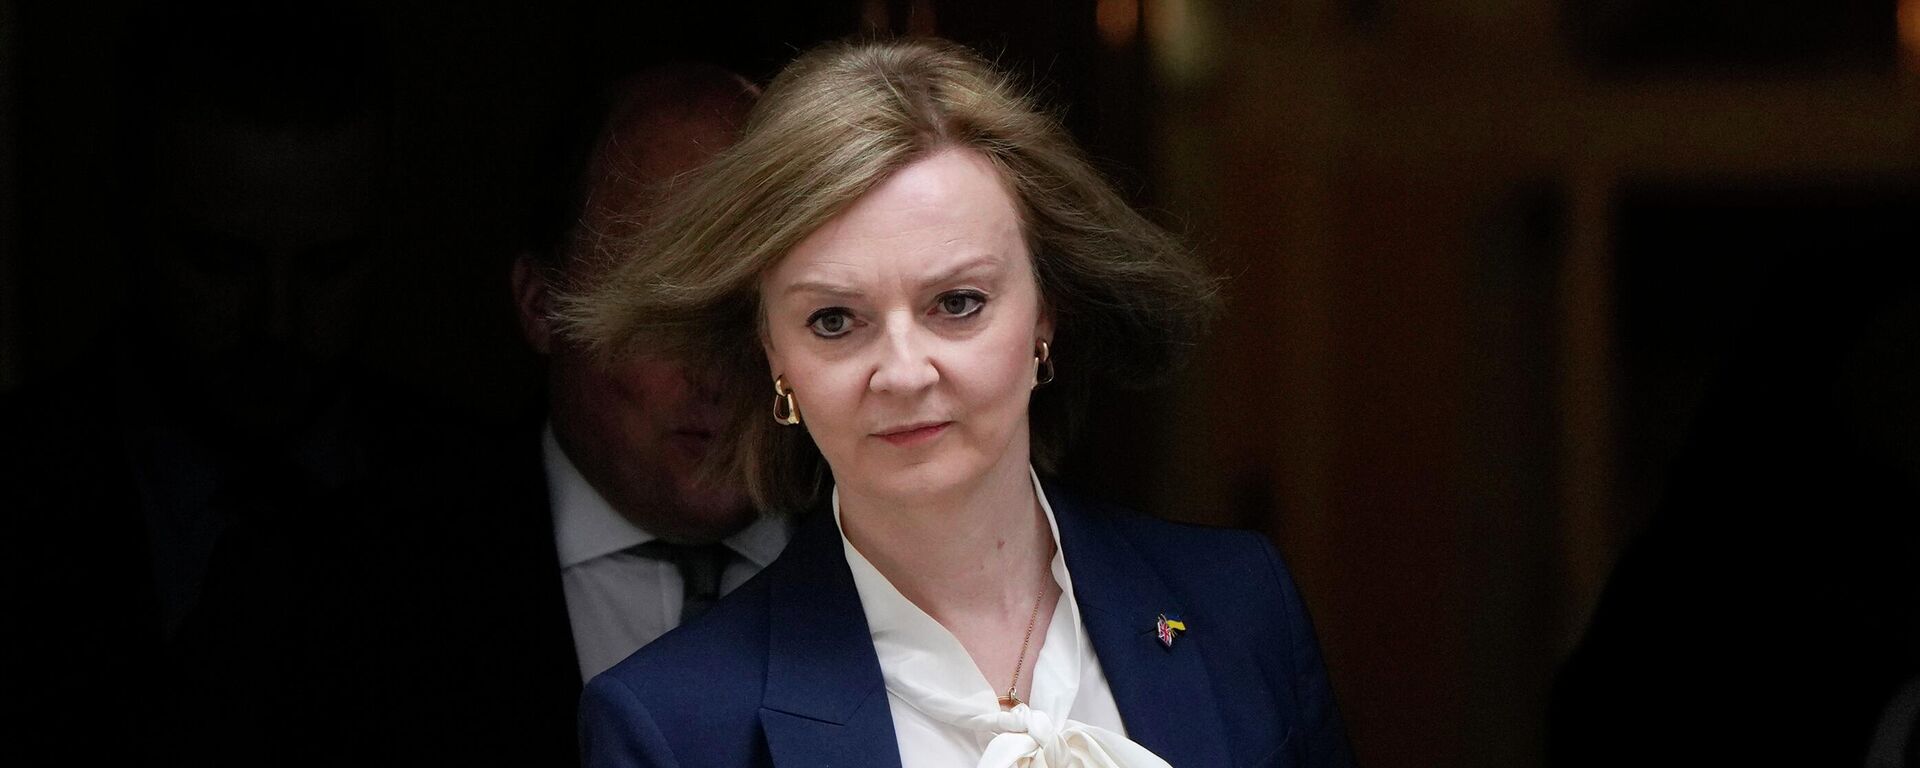  Liz Truss, Britain's Foreign Secretary leaves a Cabinet meeting at 10 Downing Street in London, Tuesday, April 19, 2022 - Sputnik International, 1920, 02.08.2022